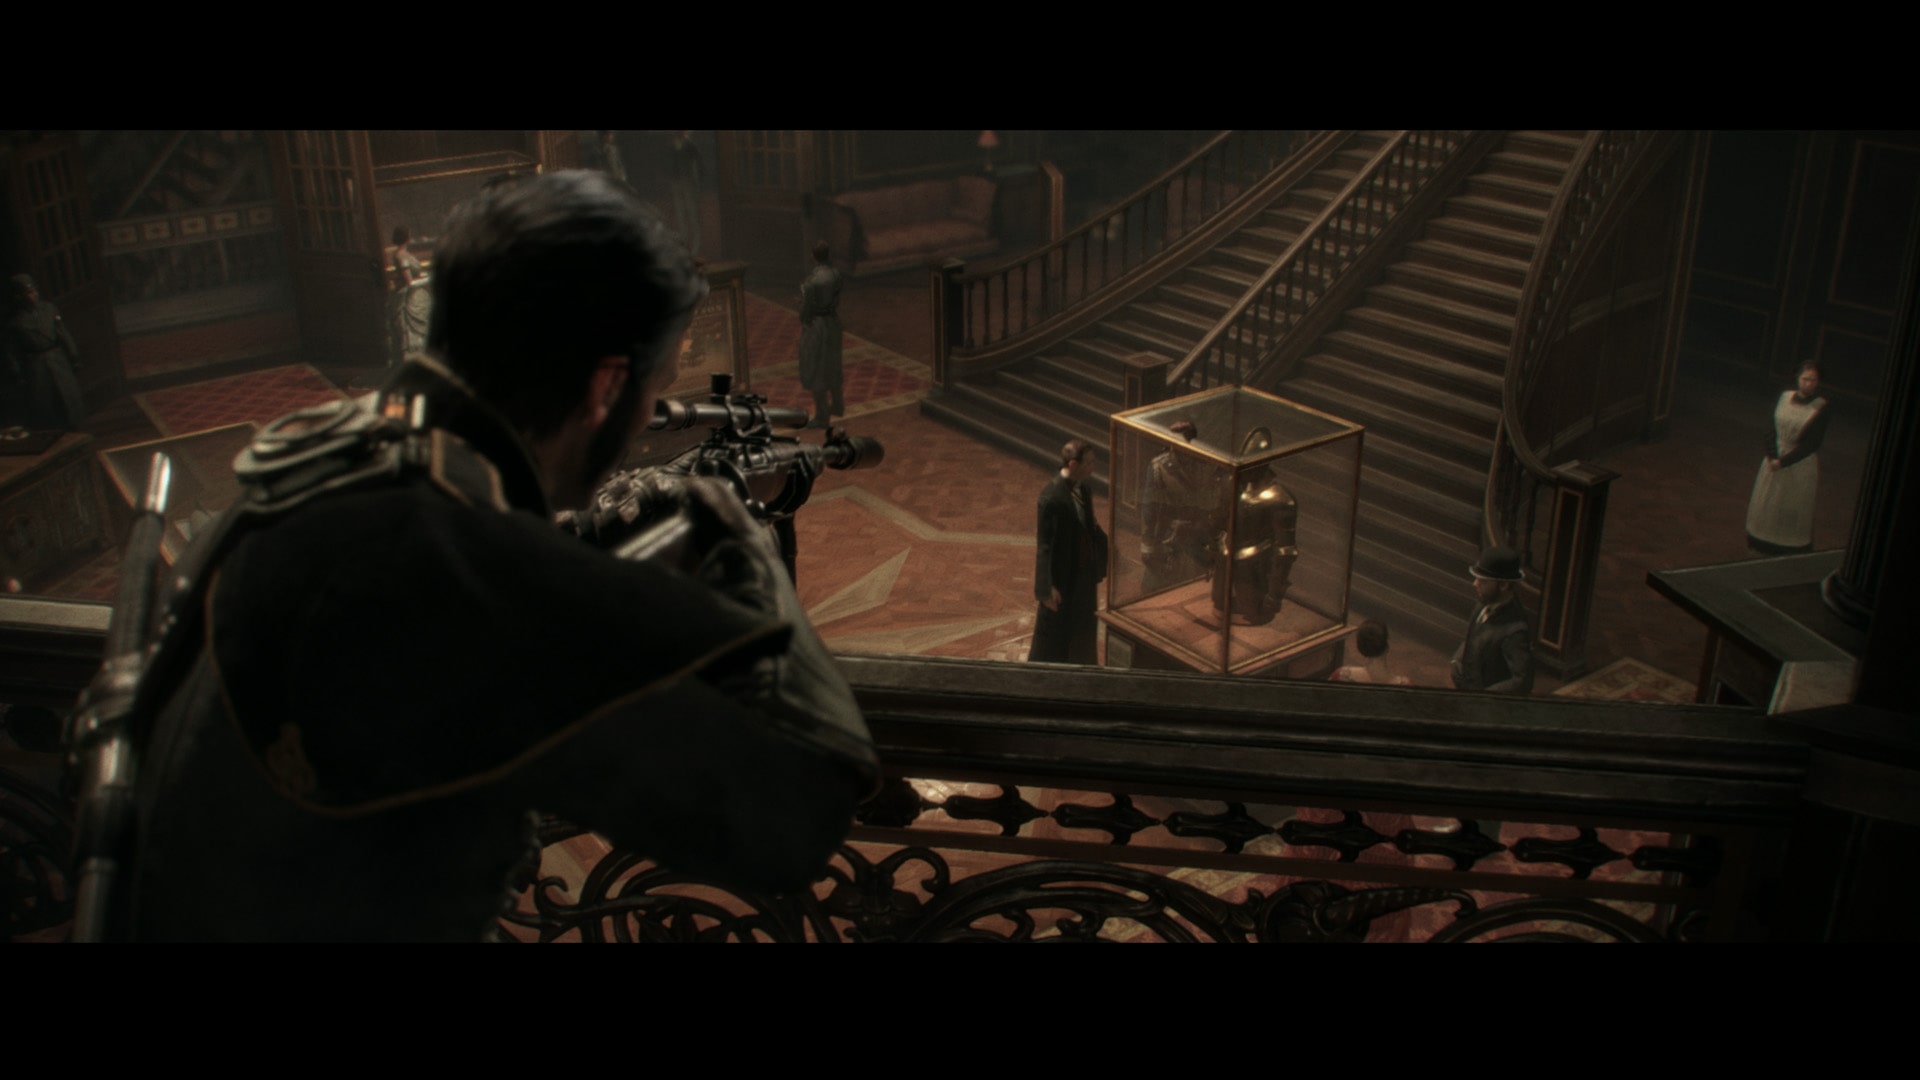 the order 1886 playstation 4